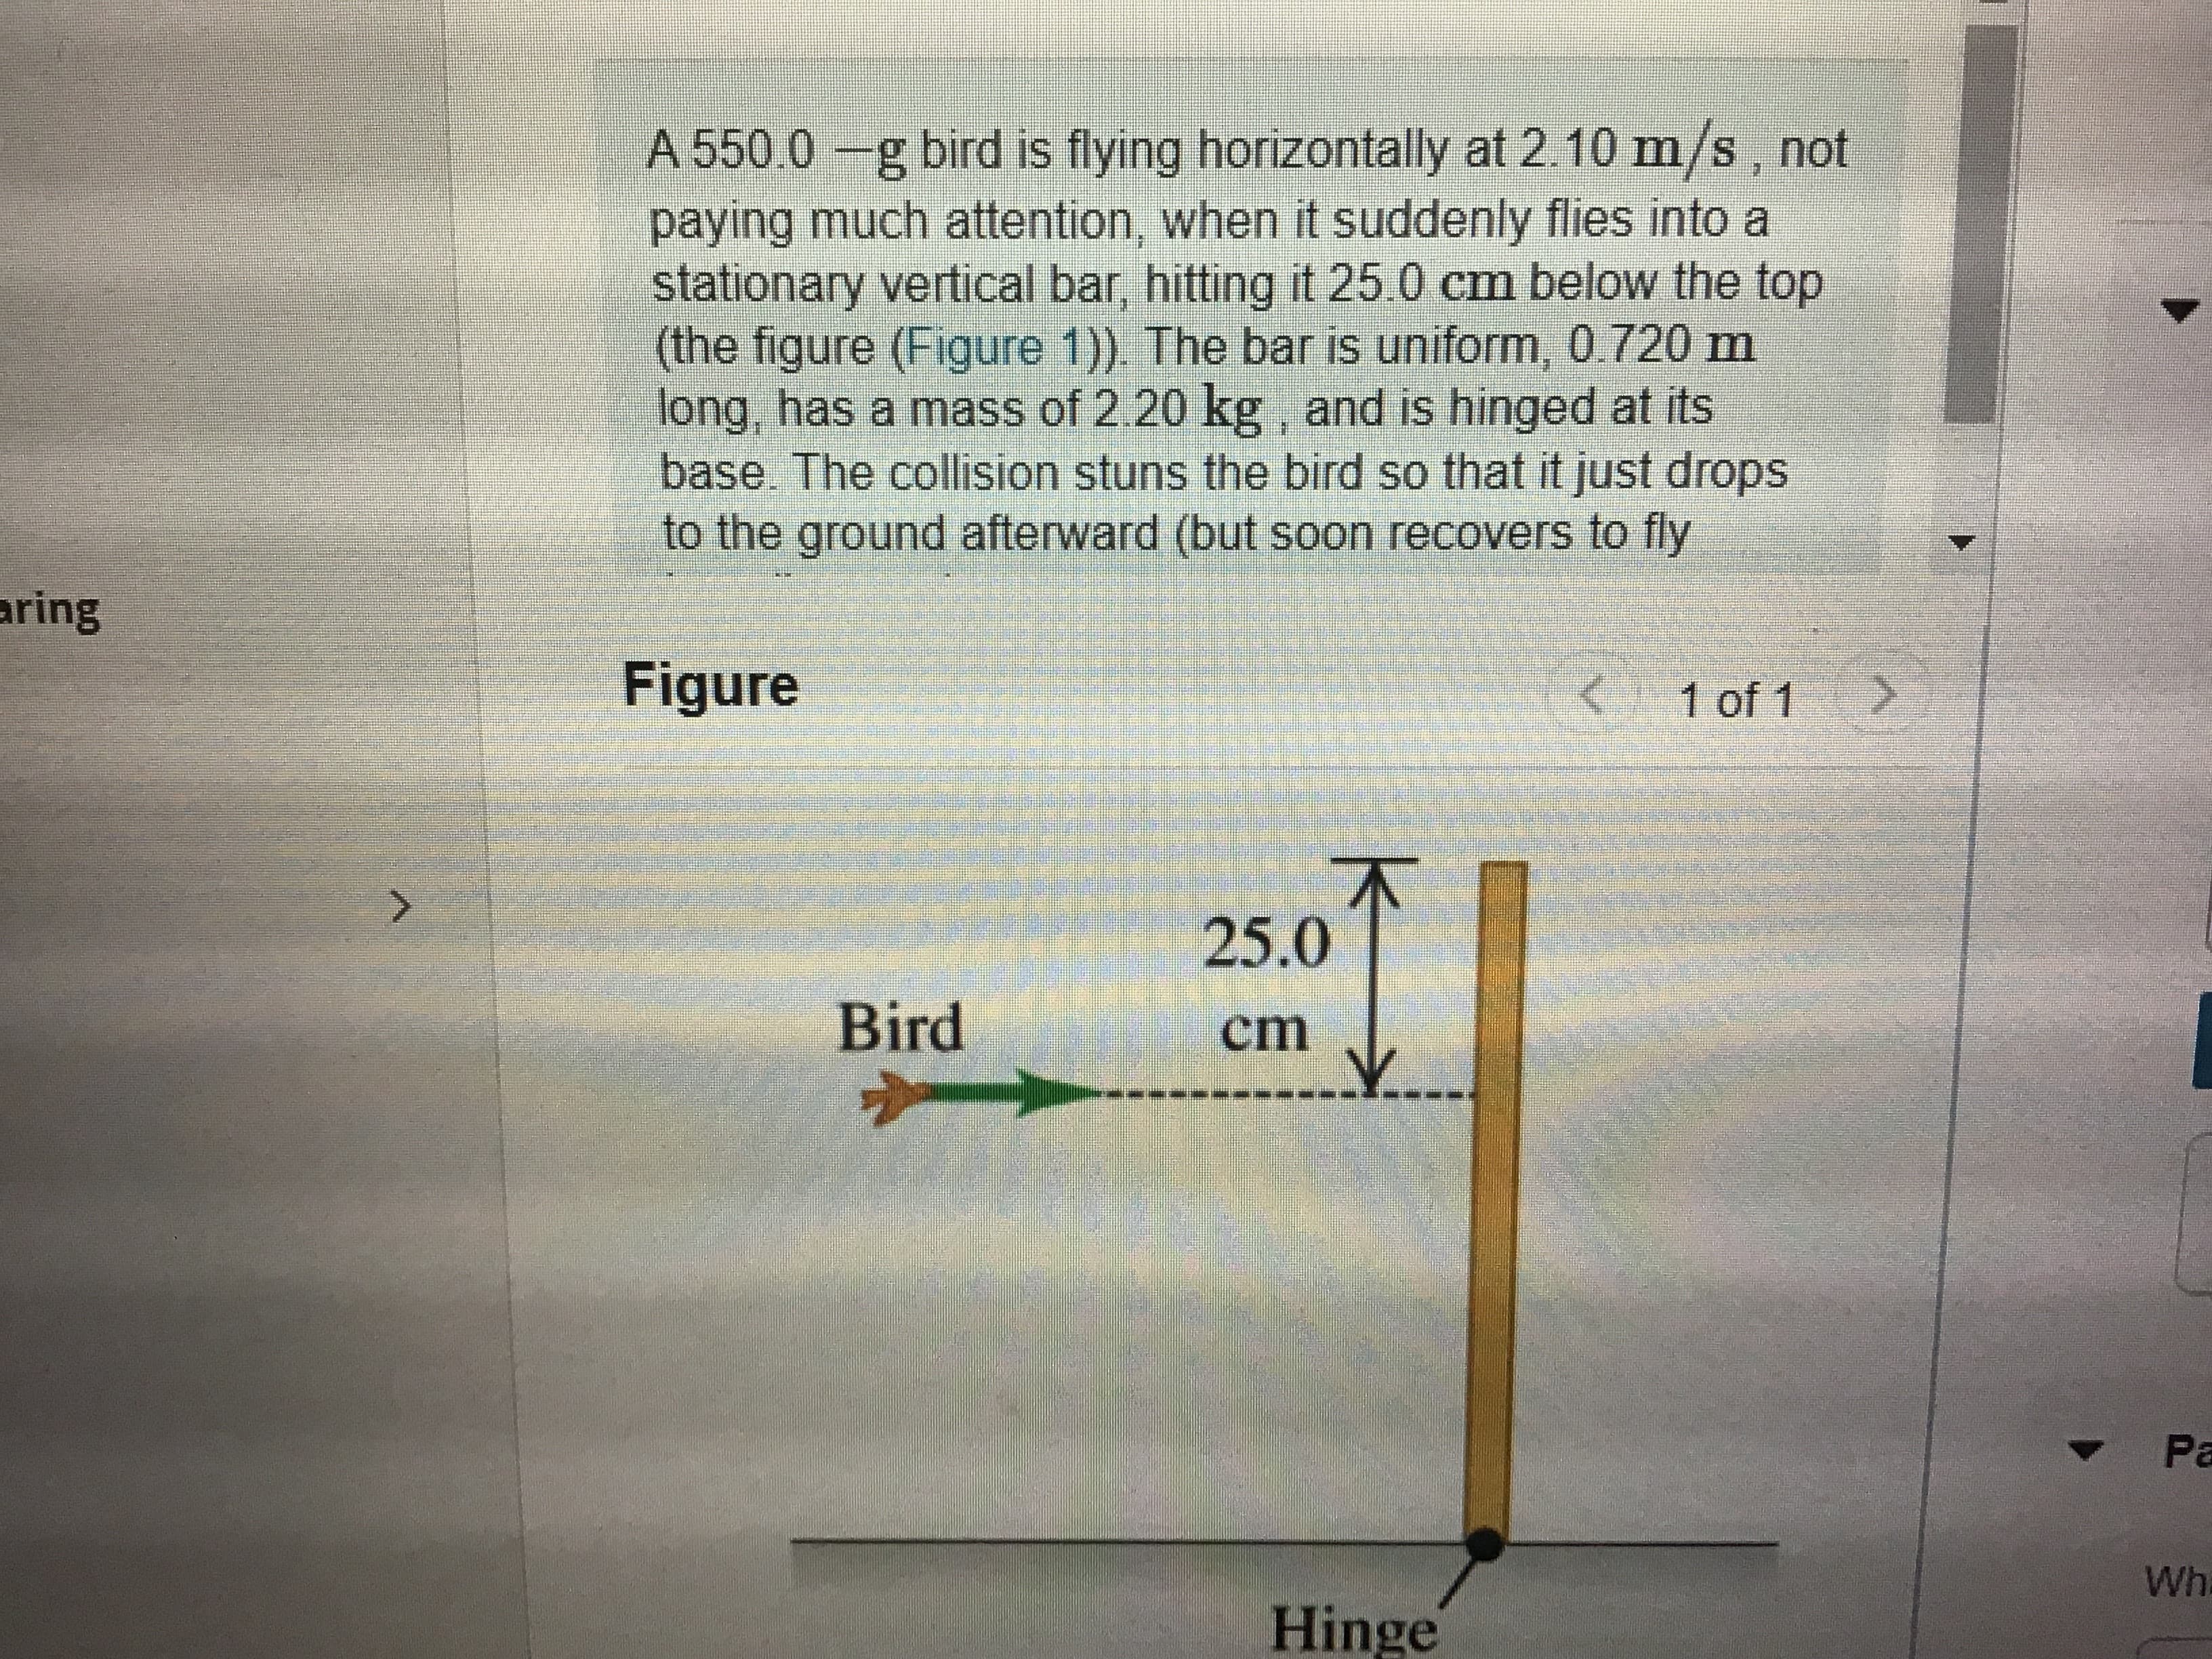 A 550.0 -g bird is flying horizontally at 2.10 m/s, not
paying much attention, when it suddenly flies into a
stationary vertical bar, hitting it 25.0 cm below the top
(the figure (Figure 1)). The bar is uniform, 0.720 m
long, has a mass of 2.20 kg , and is hinged at its
base. The collision stuns the bird so that it just drops
to the ground afterward (but soon recovers to fly
aring
Figure
1 of 1>
25.0
Bird
cт
Pa
Wh
Hinge
